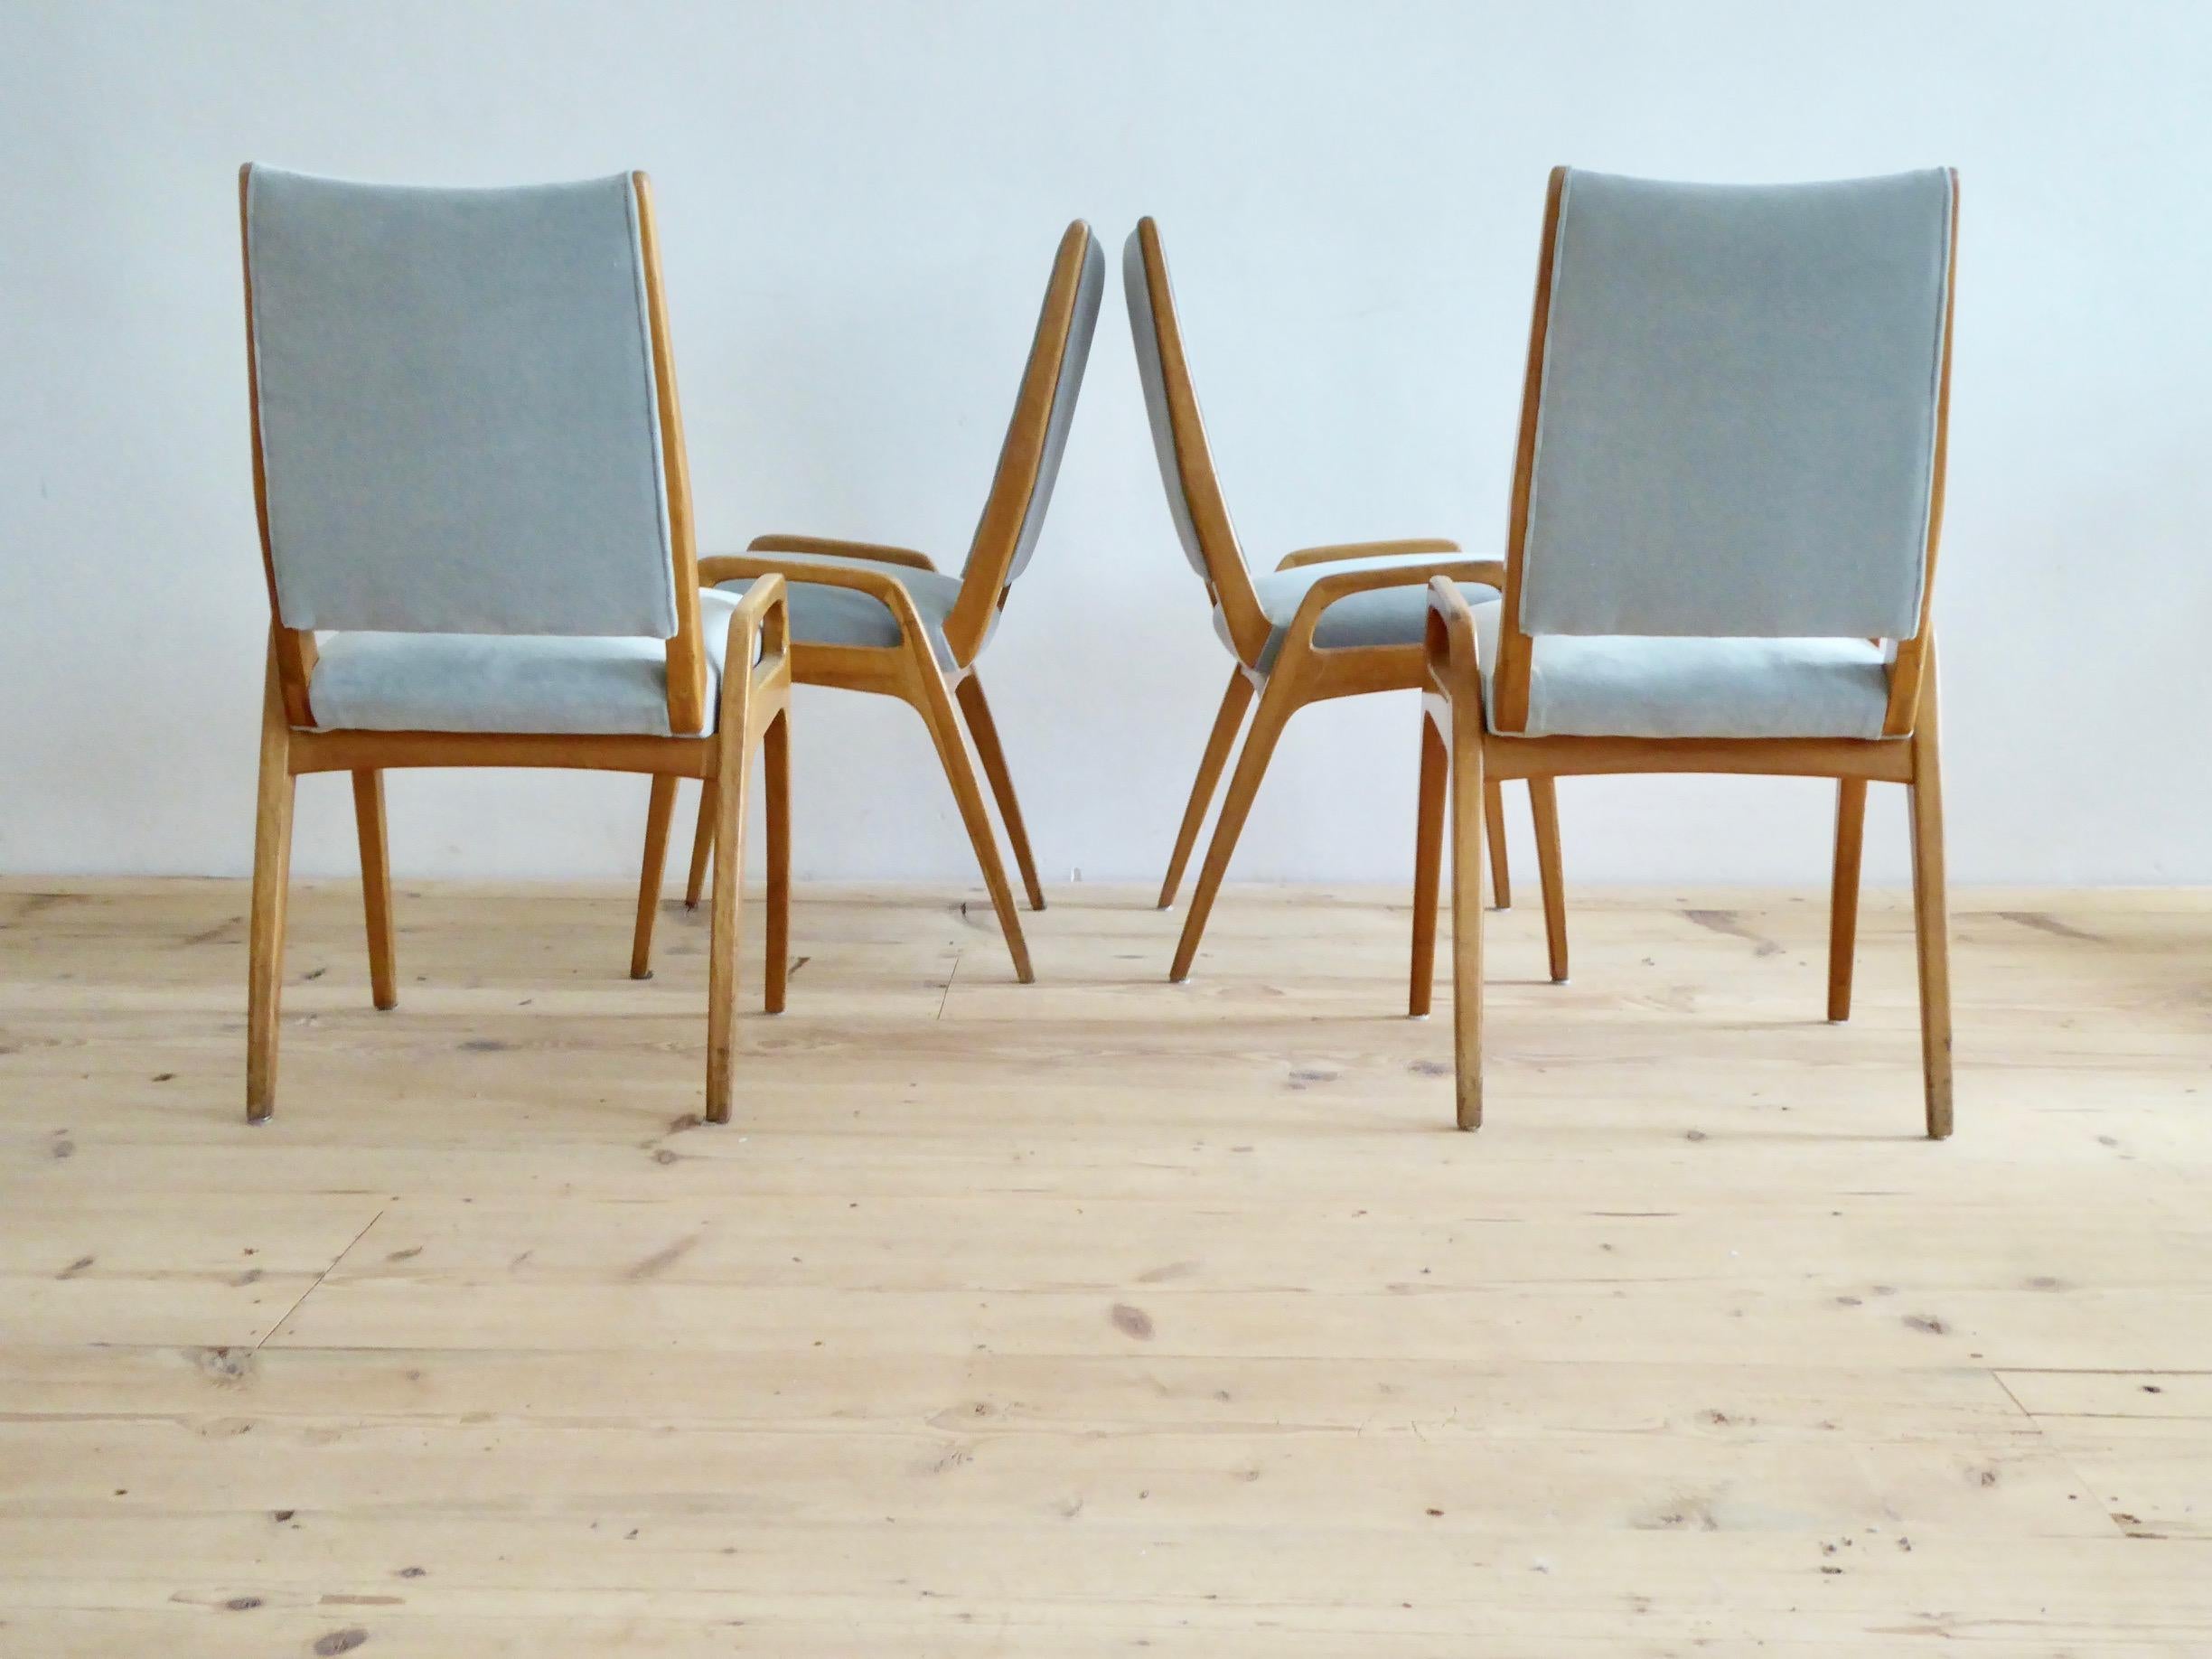 Set of four elegant dining room chairs with a frame of massive walnut. They are newly upholstered with a high quality velvet fabric in light grey to underline their fresh character and Fine attitude.
To show the chairs historical integrity, we left